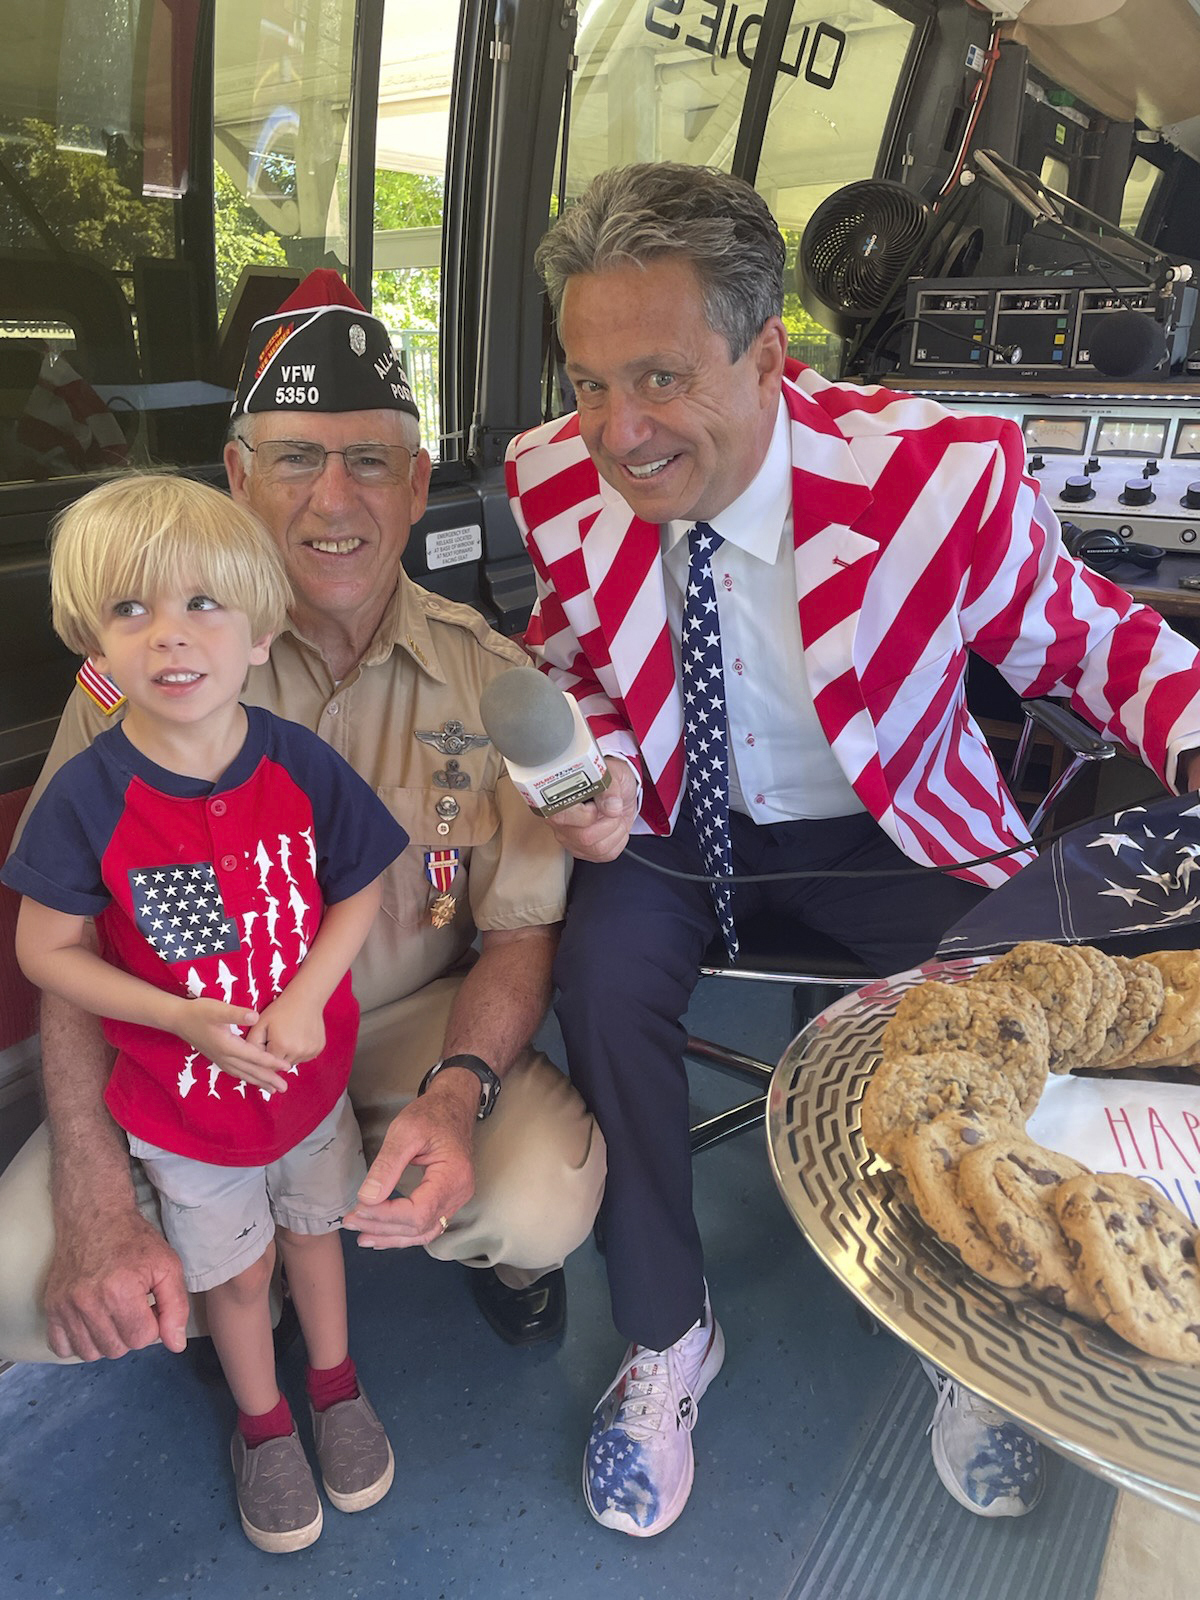 Jameson Hughes, William Hughes VFW Post 5350 Commander and Mr. Bill Evans Owner and host at WLNG, broadcasting from the Southampton July 4 parade.    COURTESY WILLIAM HUGHES
--